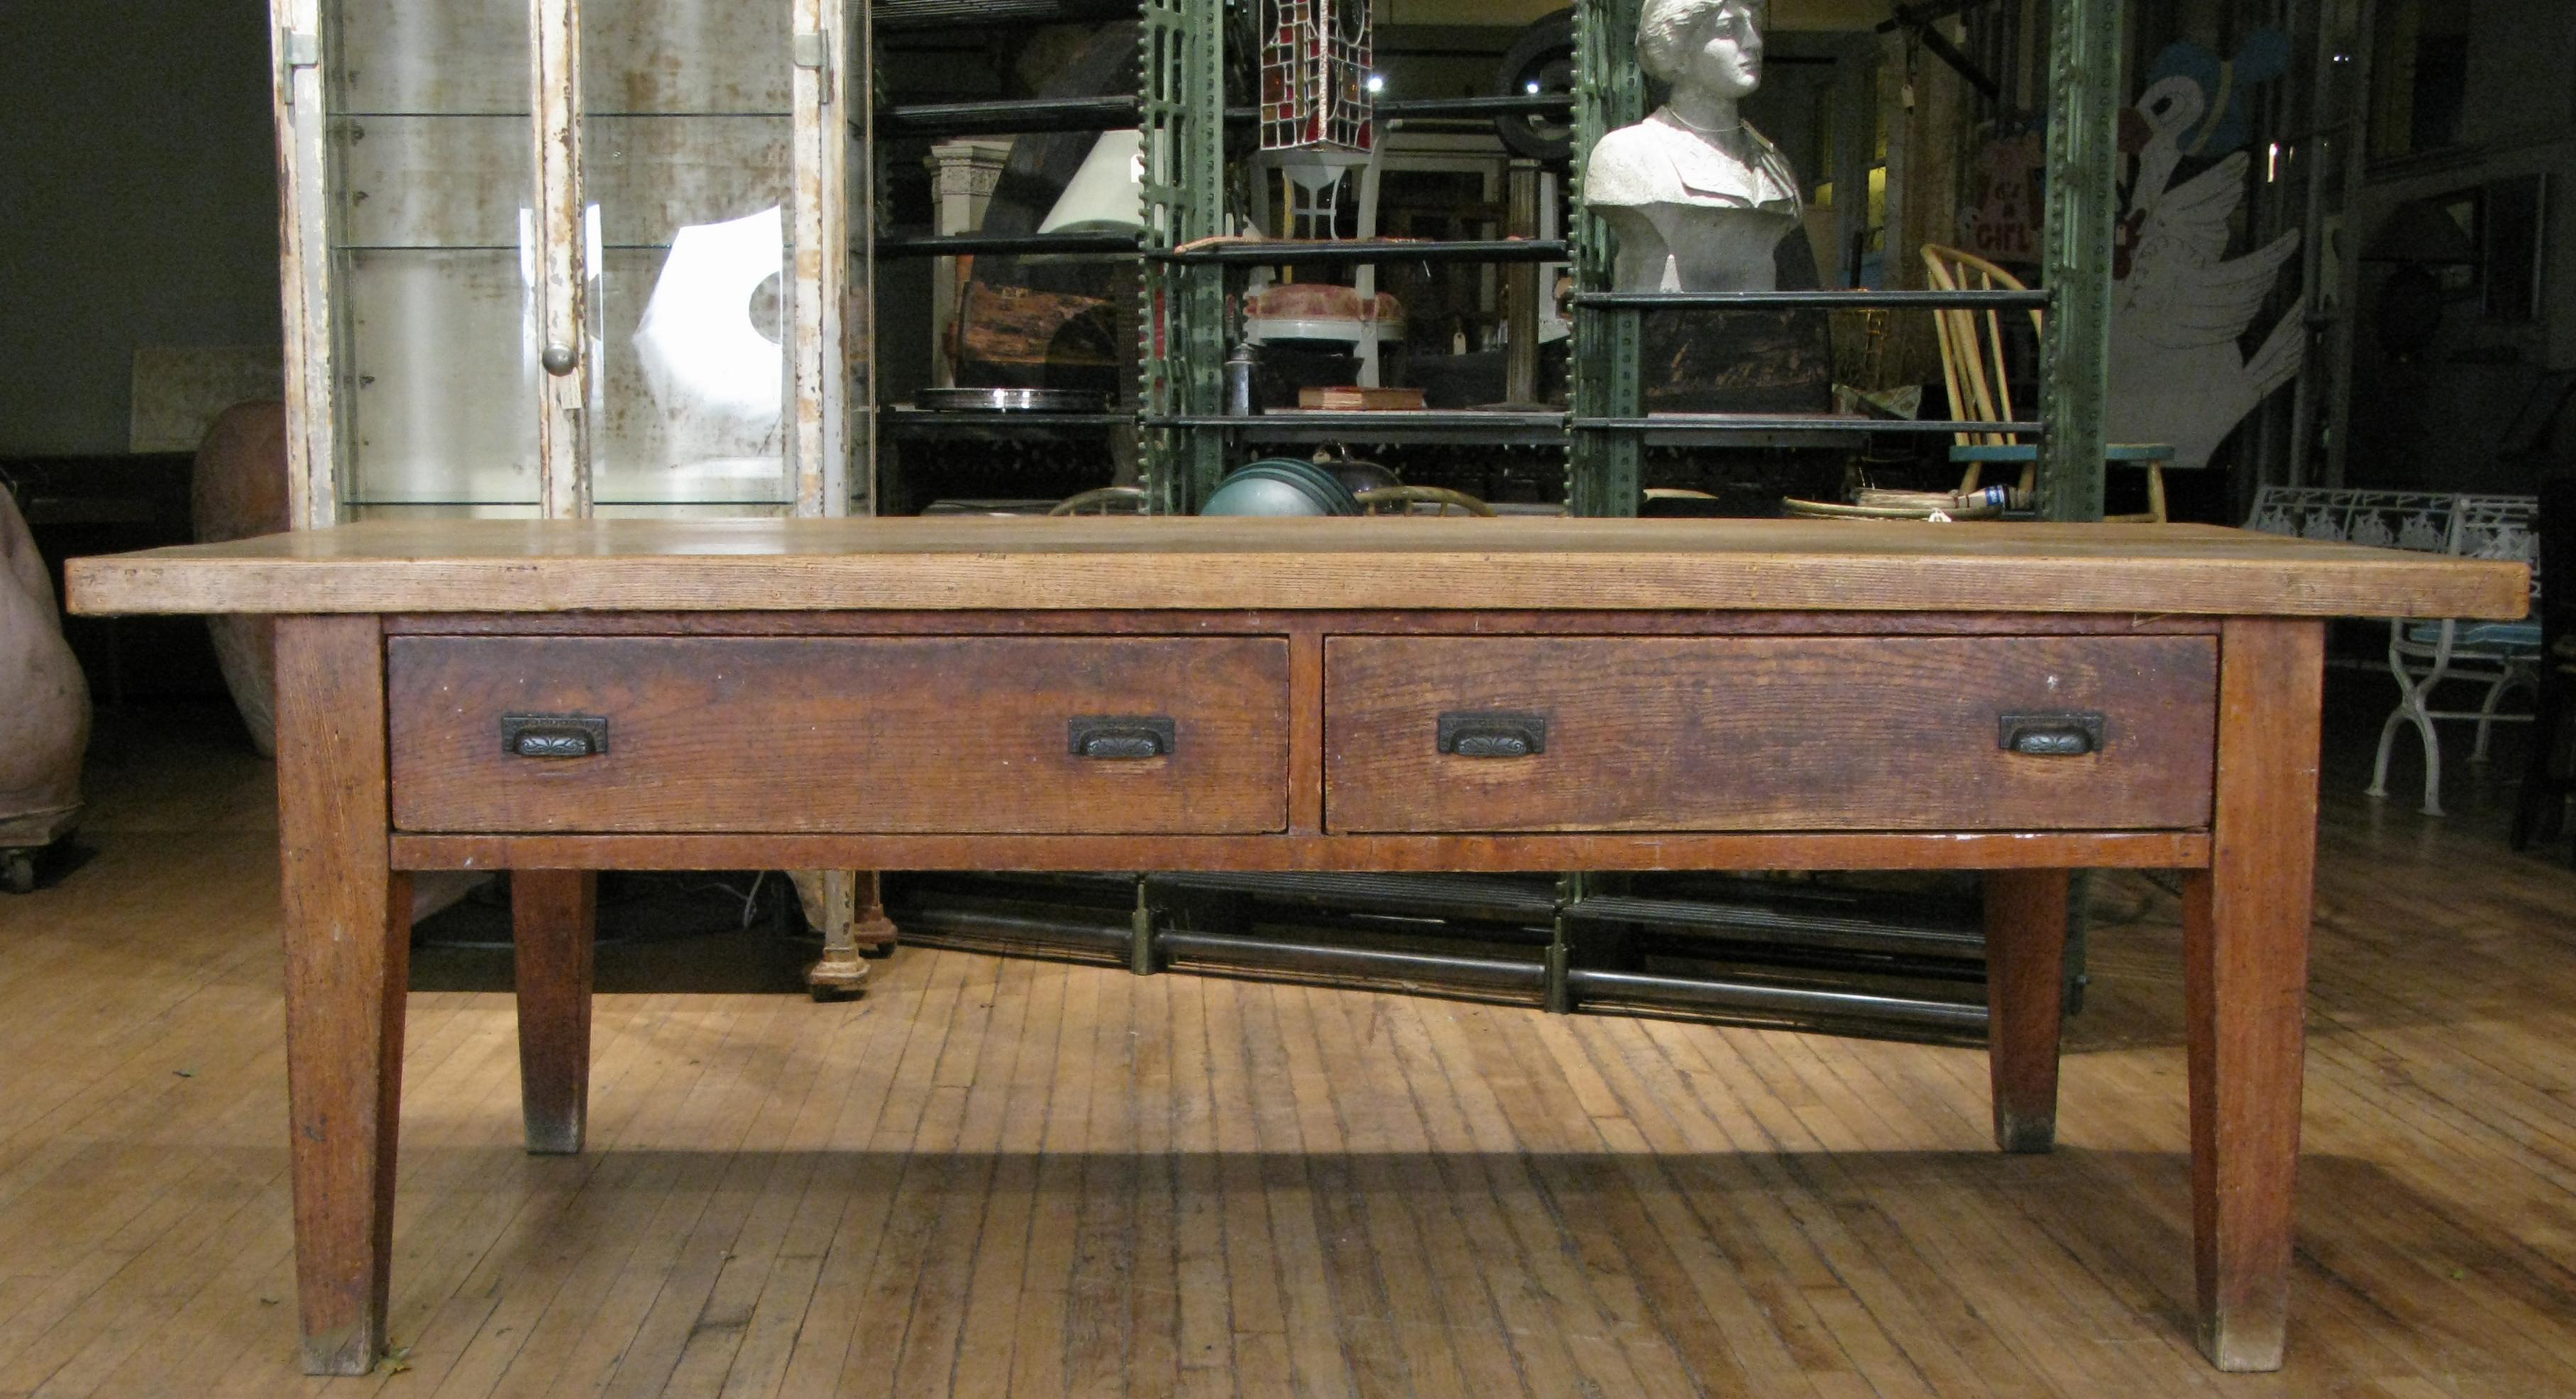 19th Century Large Antique Oak Refectory Table, Kitchen Island